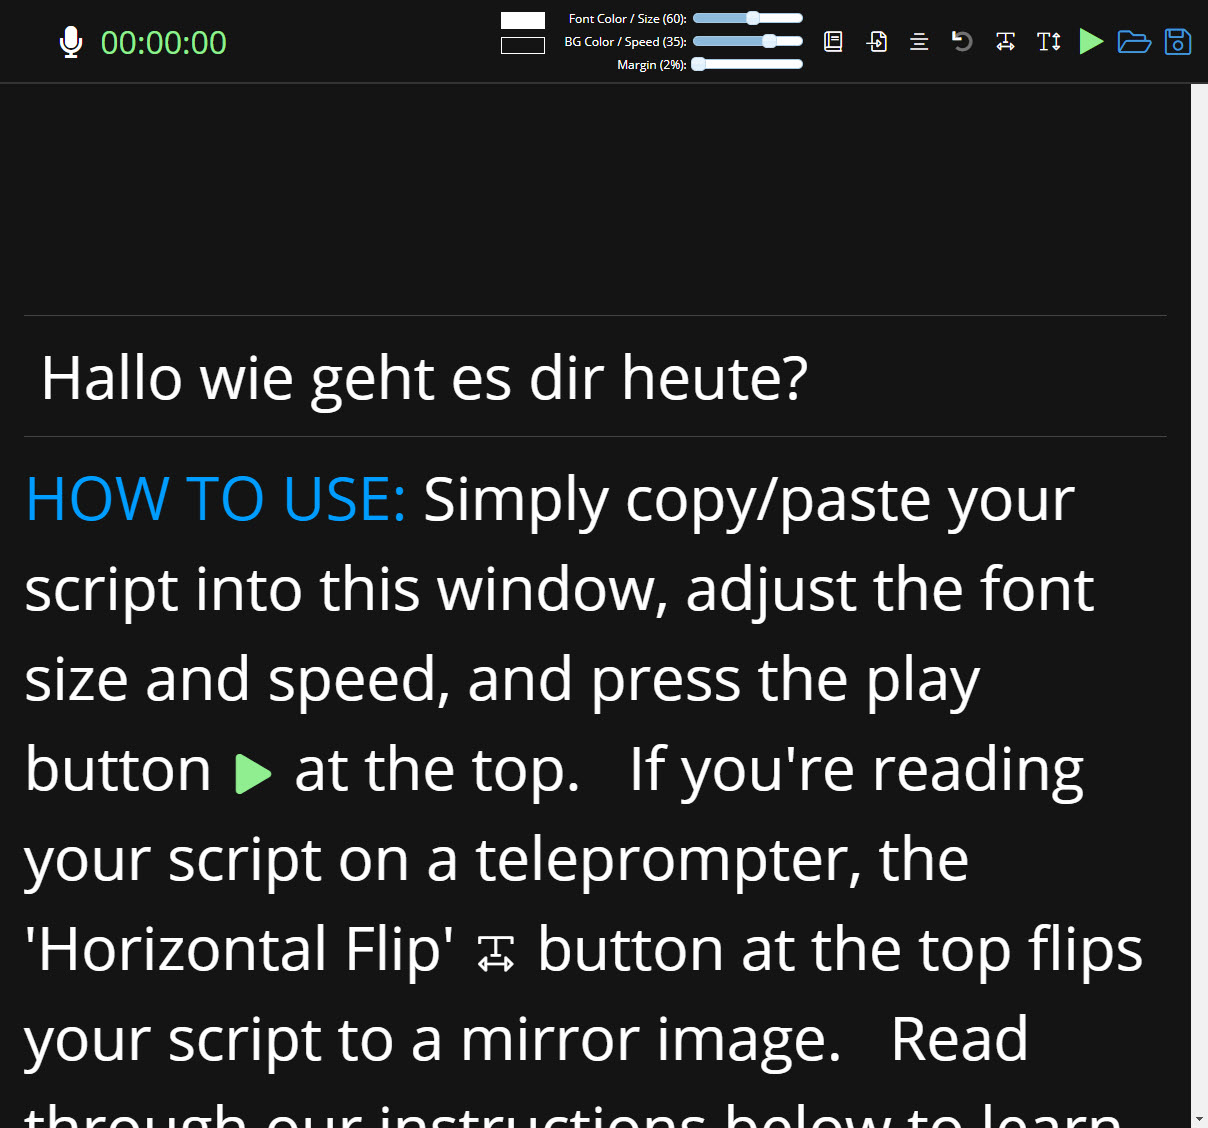 Teleprompter software